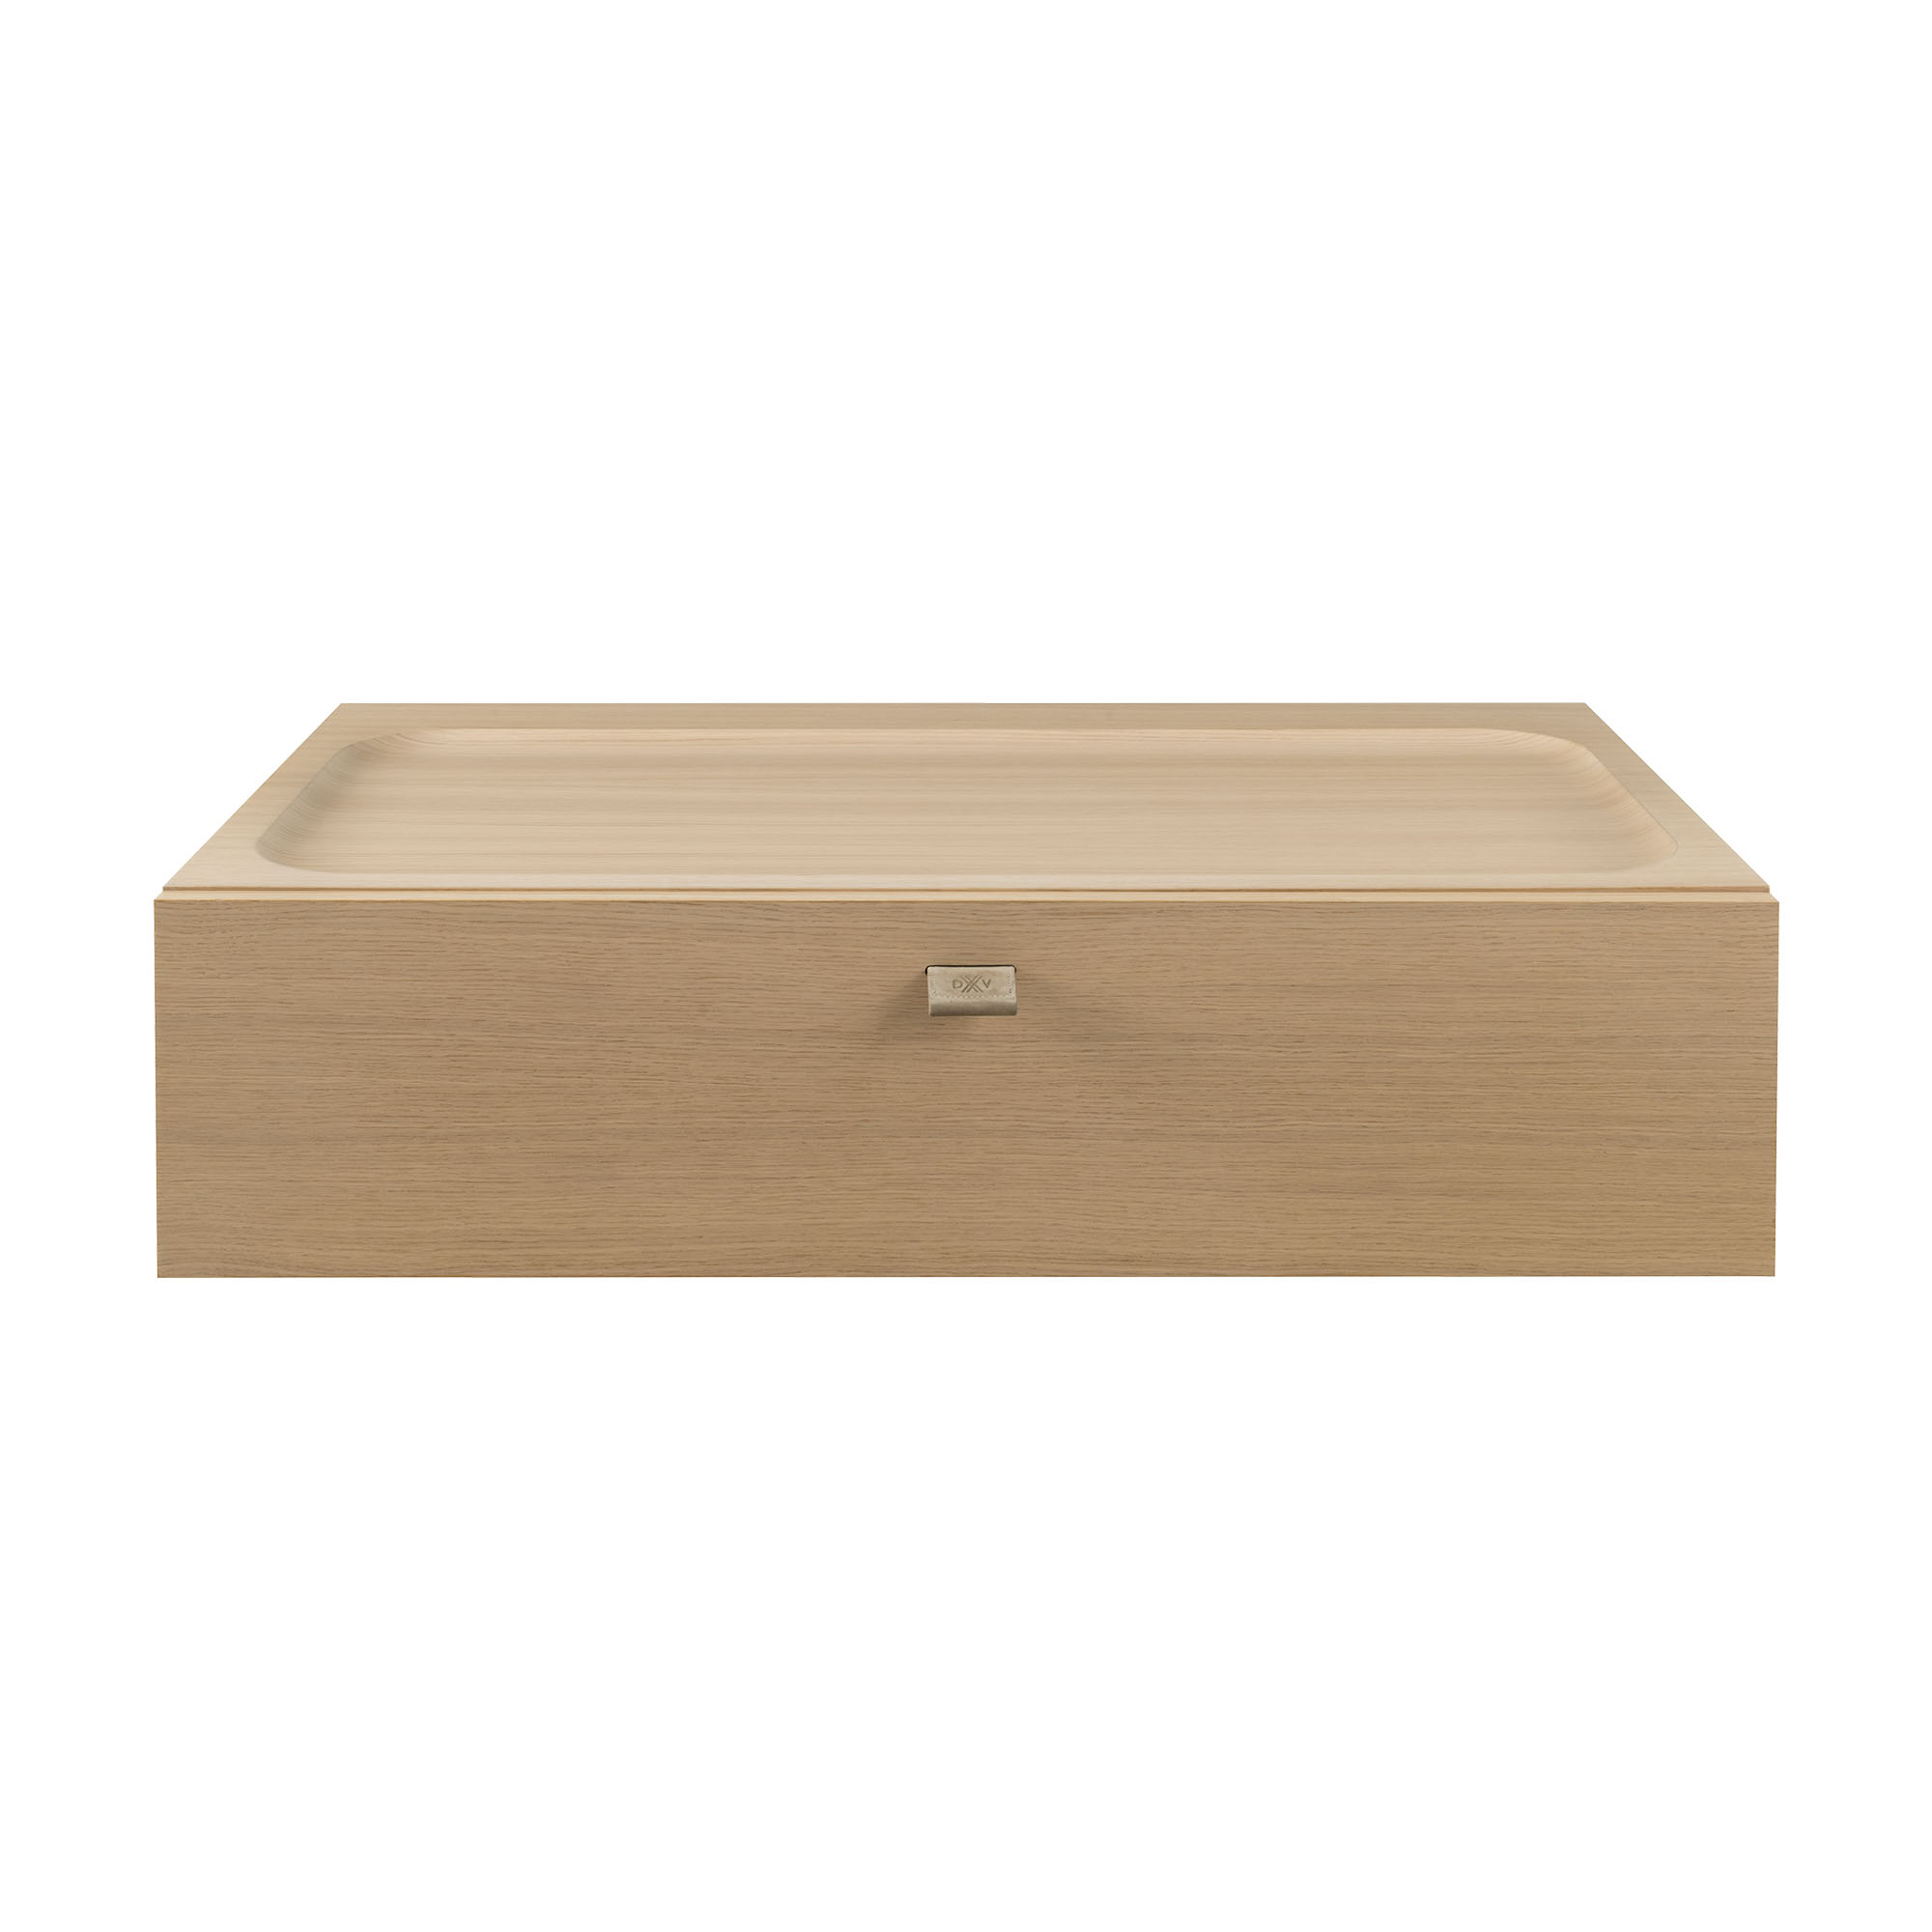 DXV Modulus 36 in. Wall-Mounted Drawer Unit